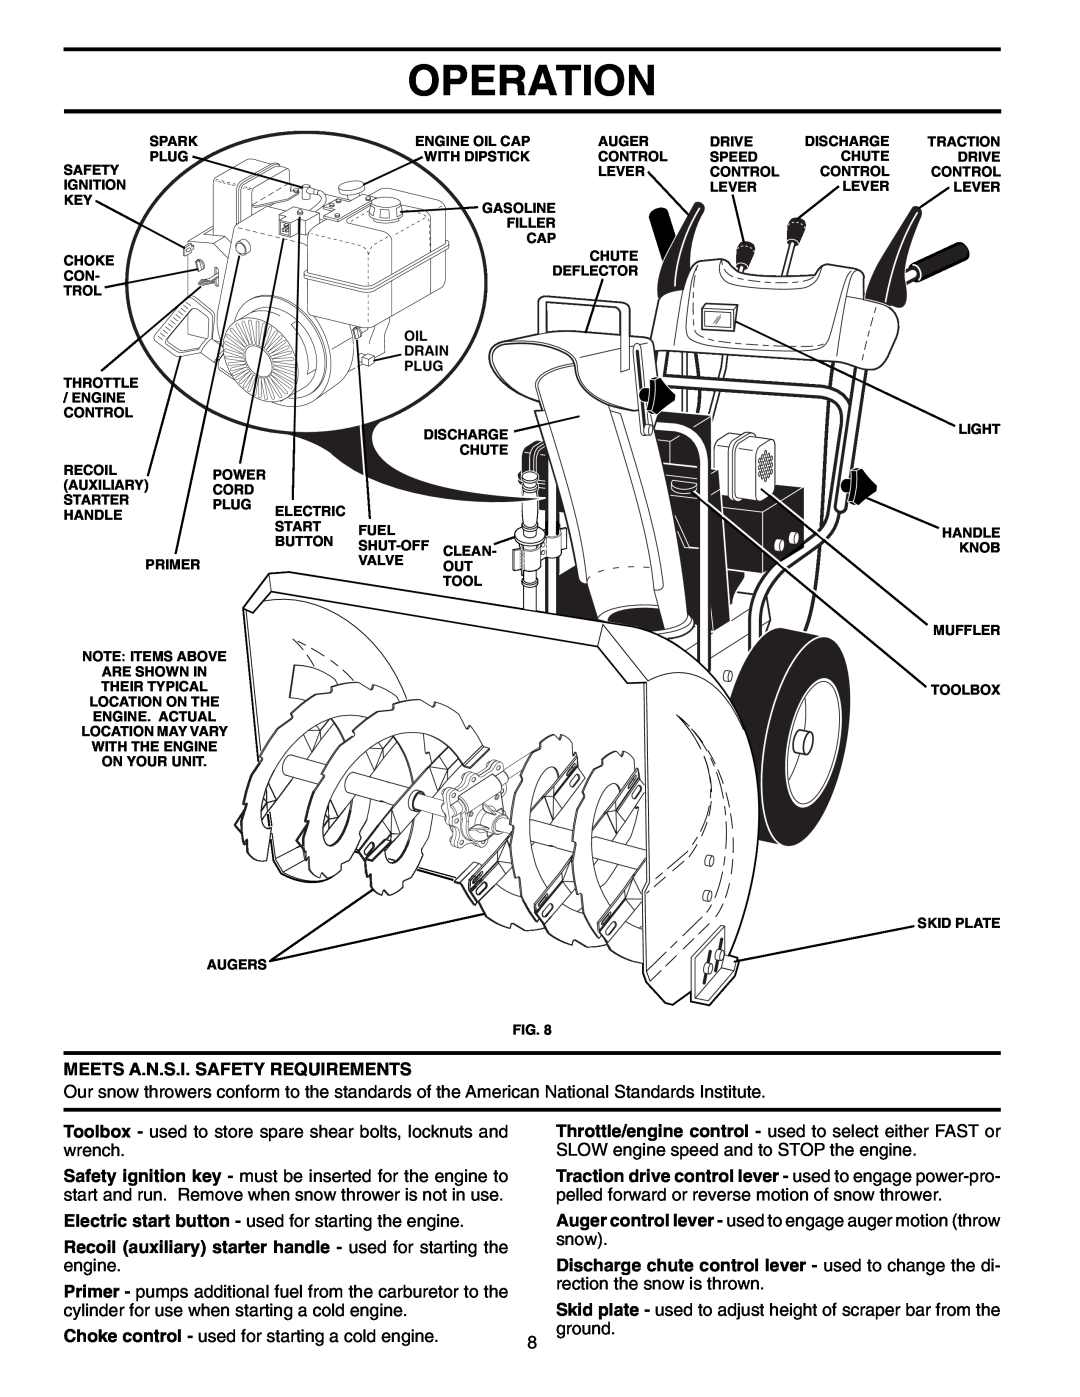 Poulan 199375 owner manual Operation, Meets A.N.S.I. Safety Requirements 